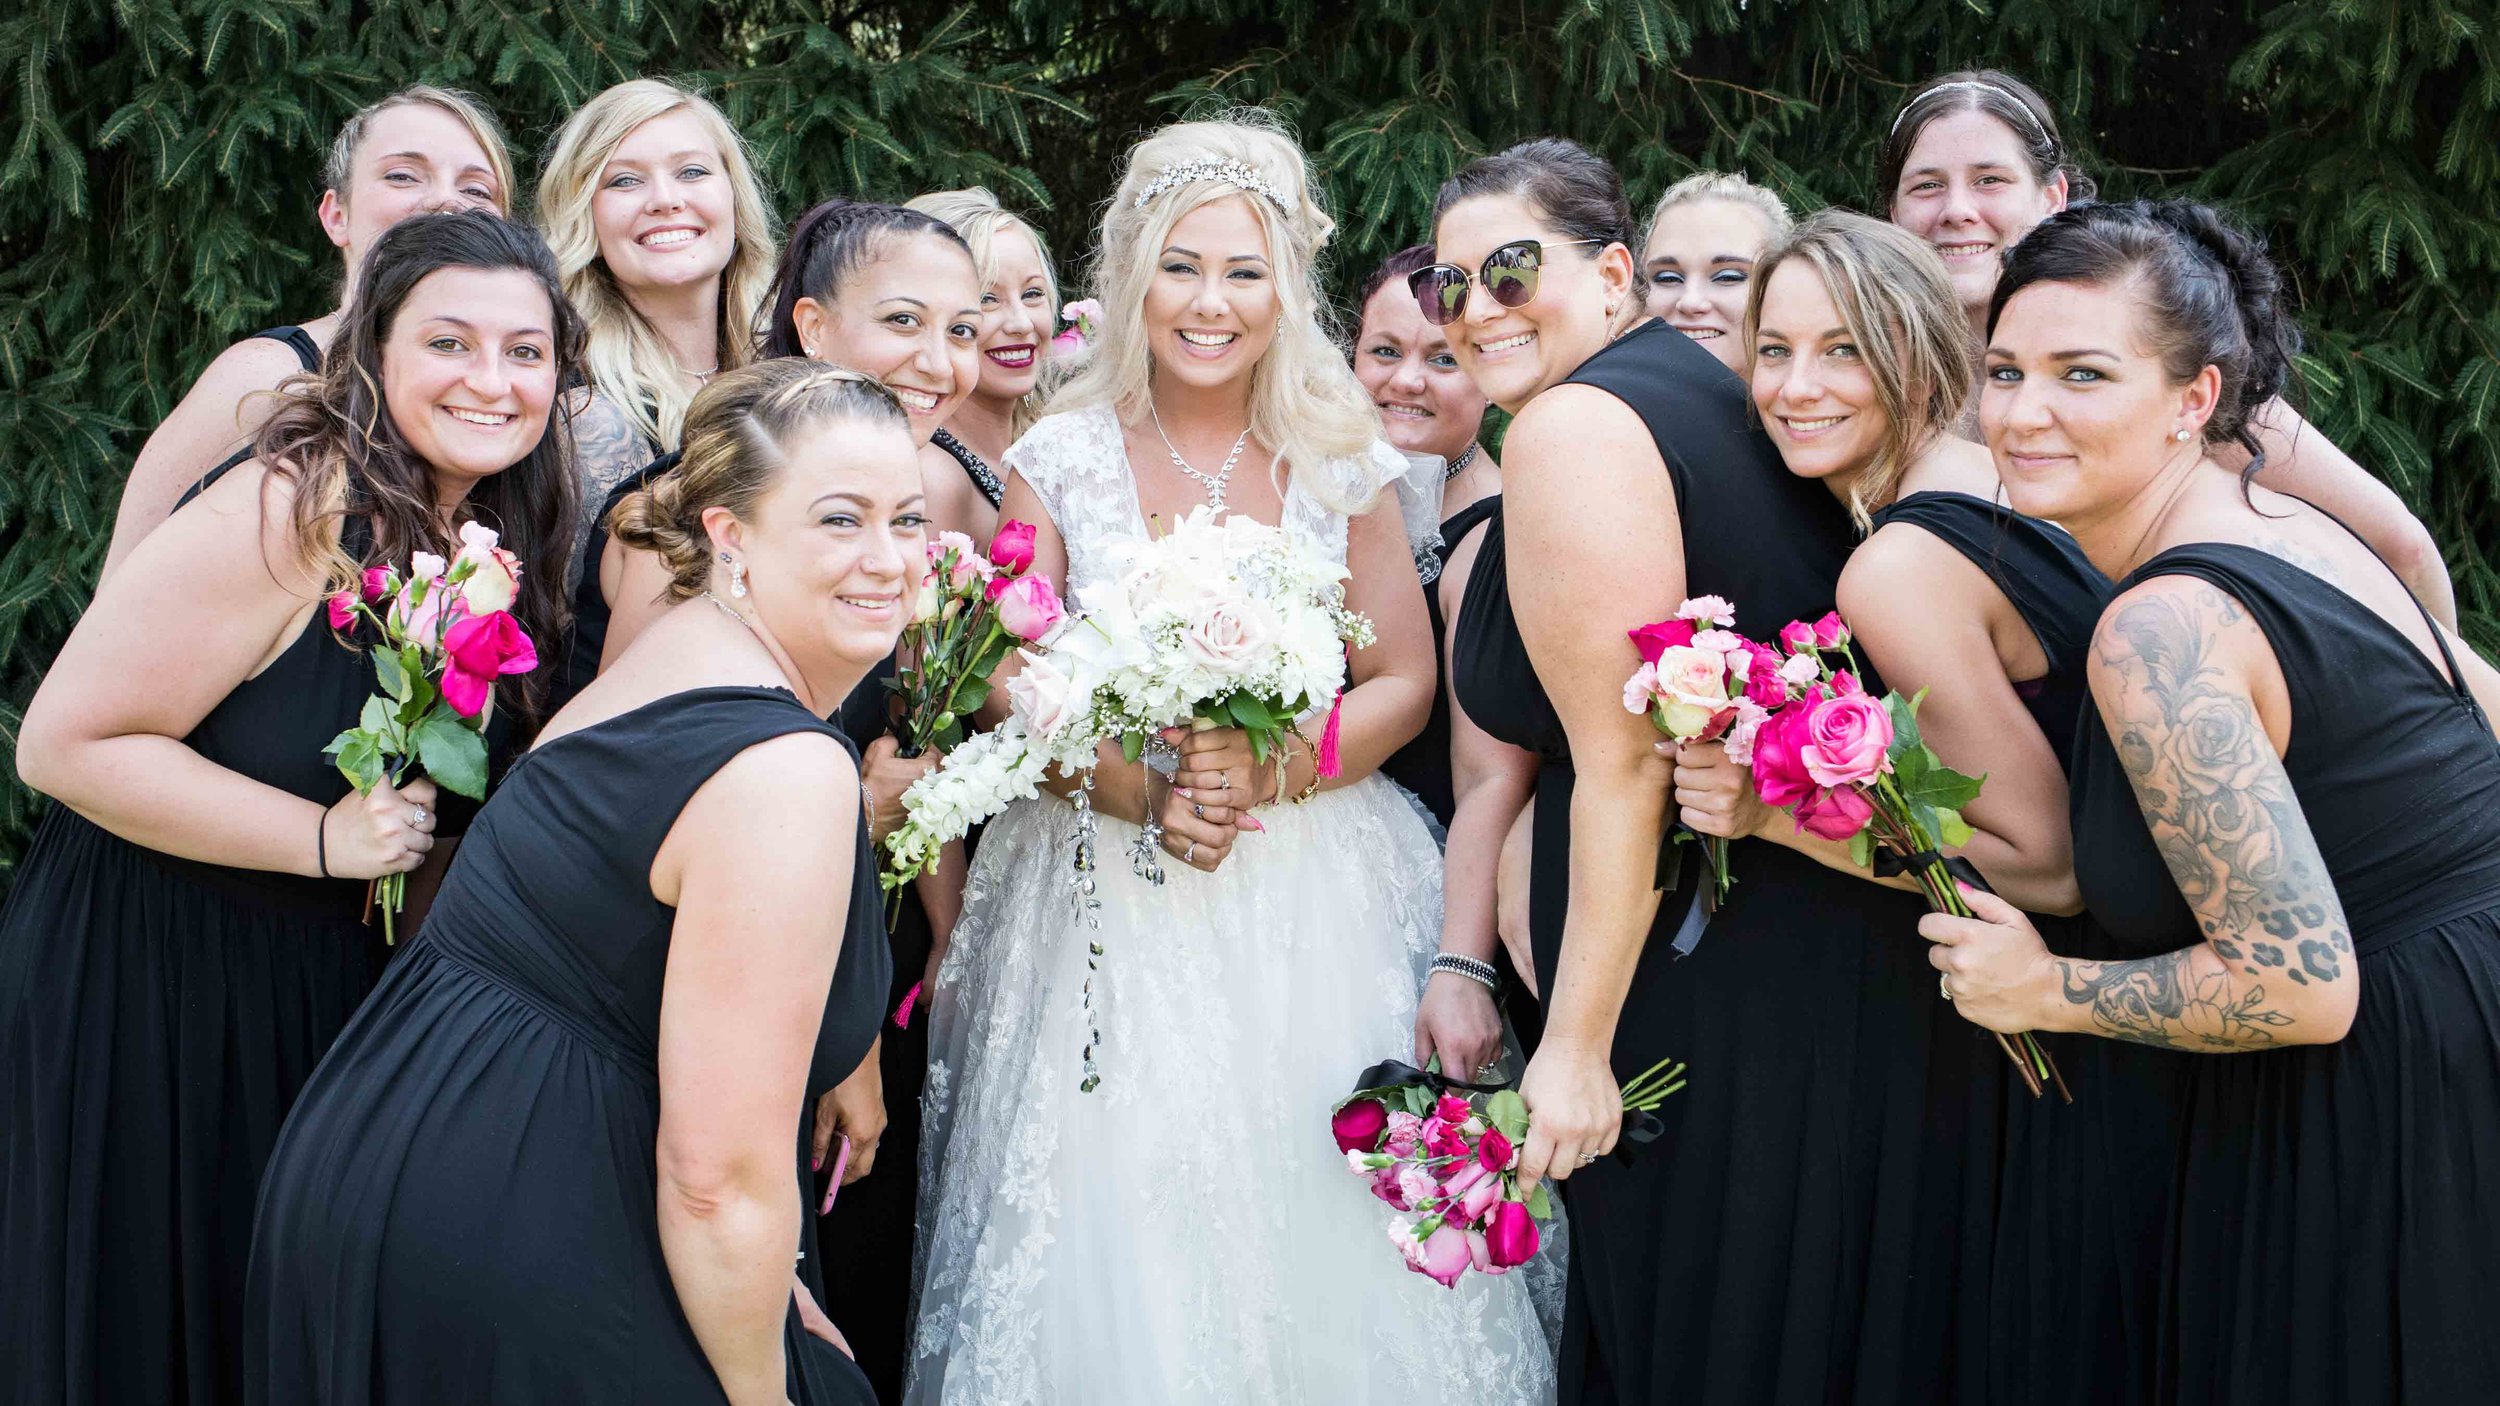  All the bridesmaids bunch together with their flowers for a picture with the bride 